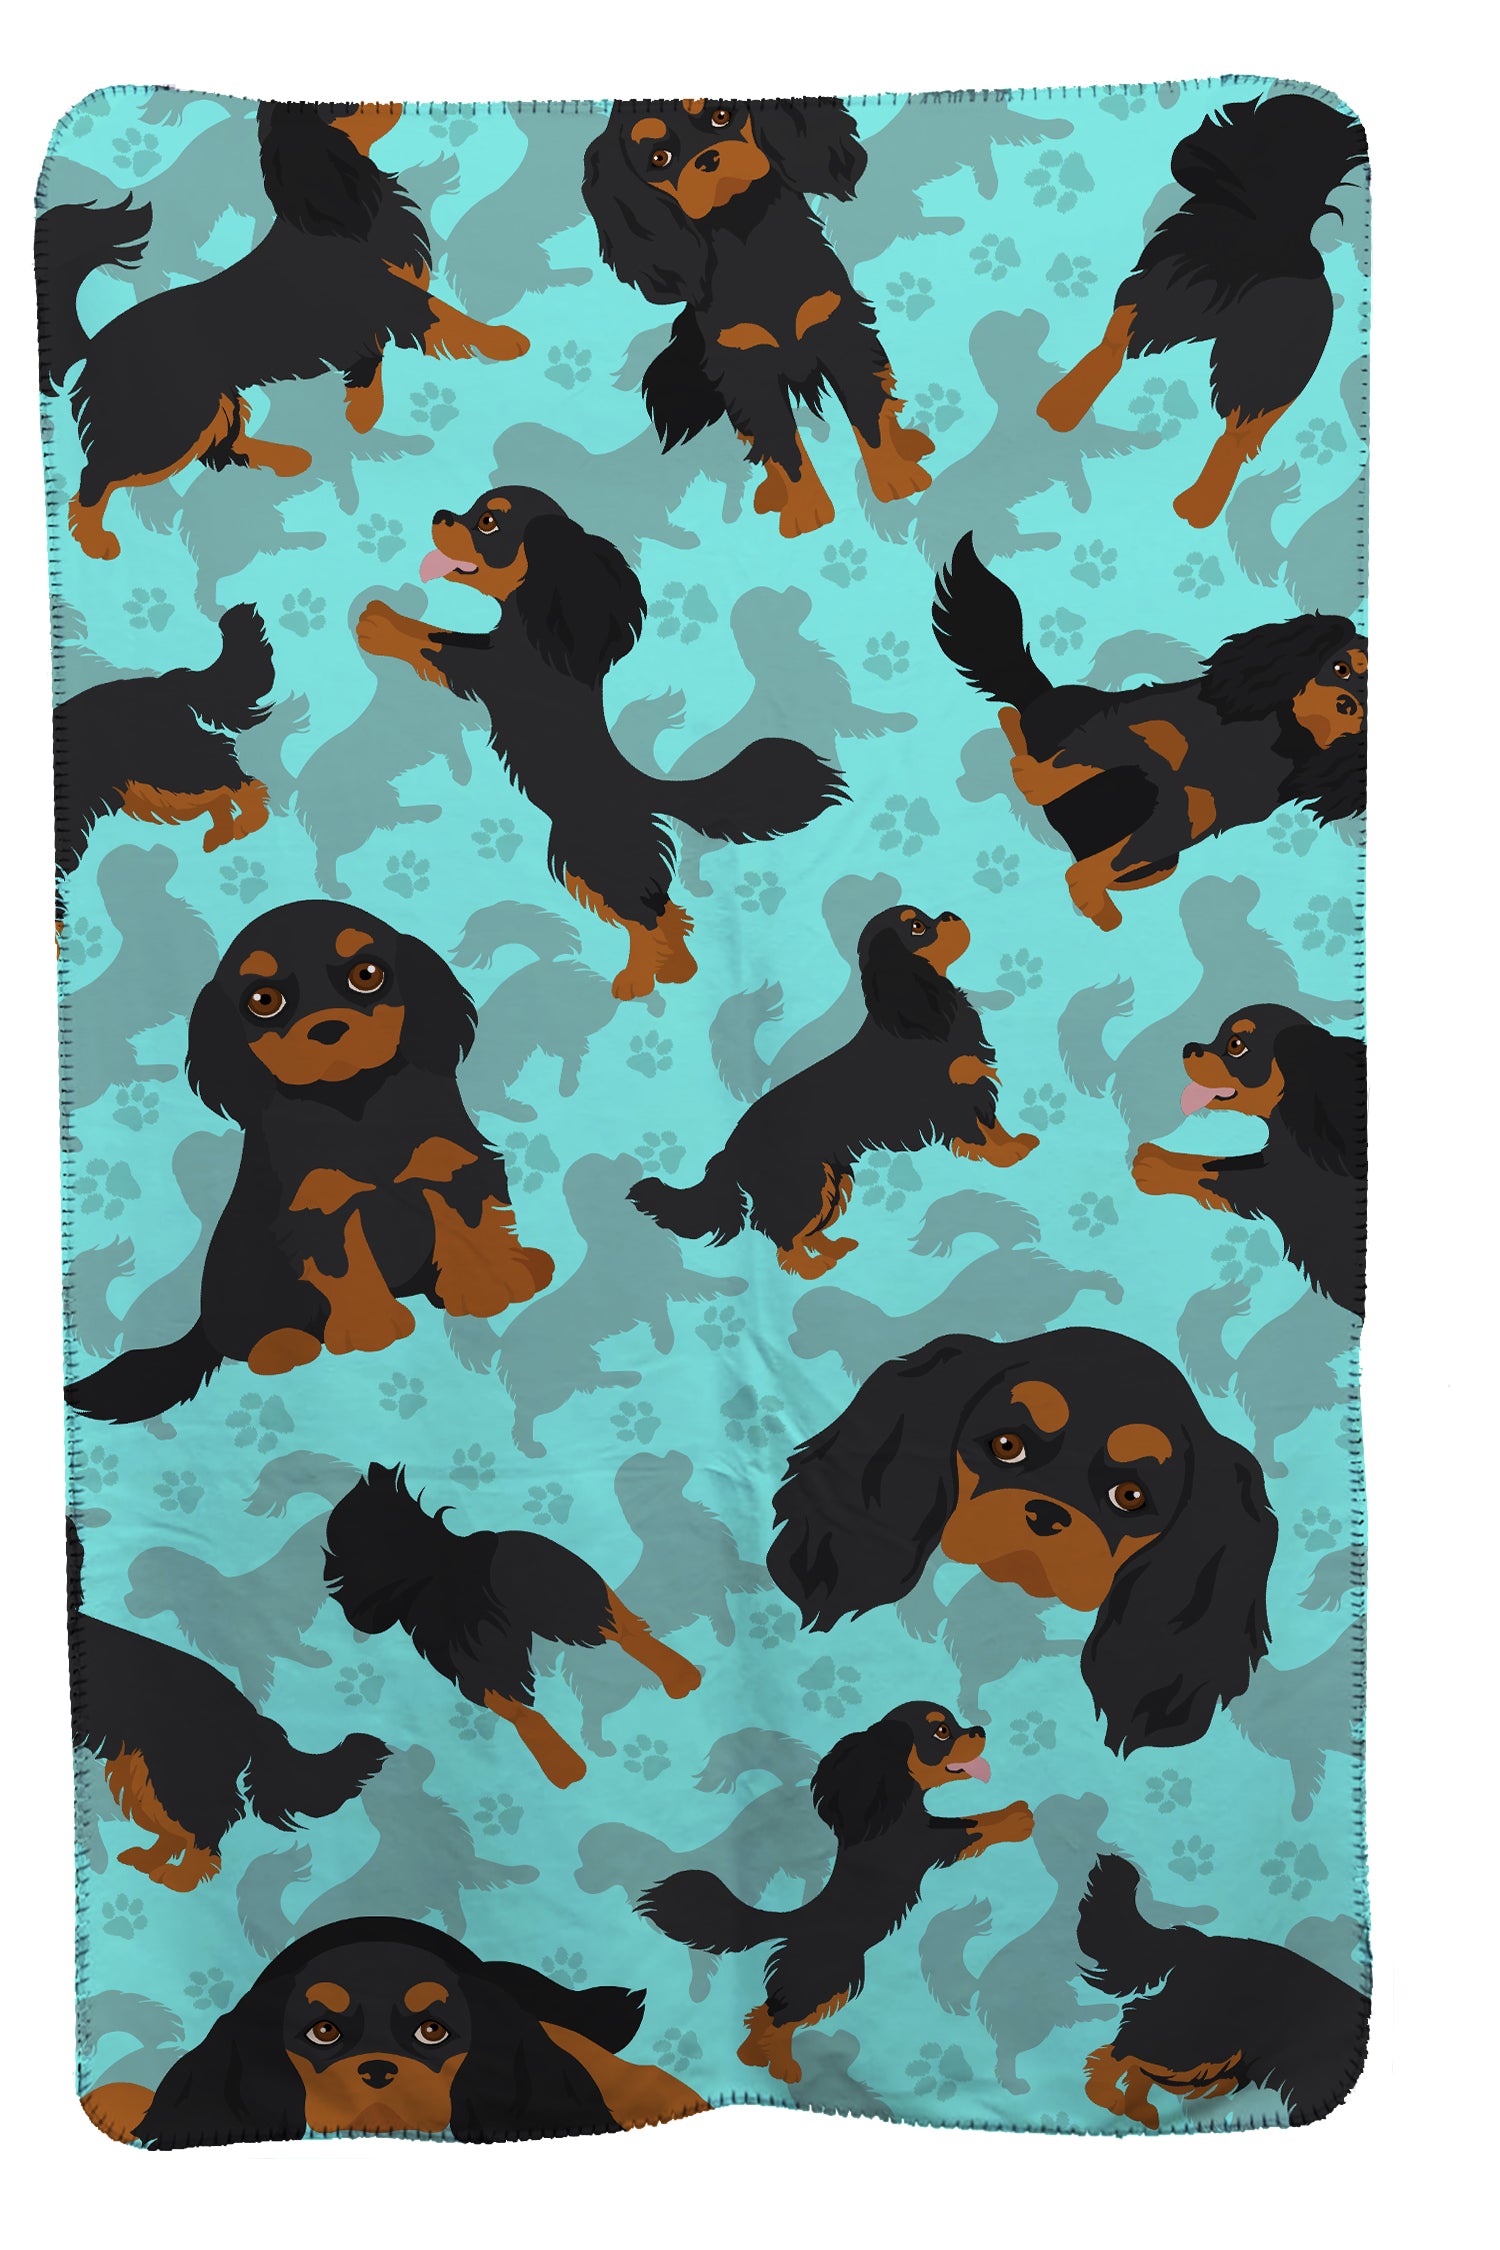 Buy this Black and Tan Cavalier King Charles Spaniel Soft Travel Blanket with Bag